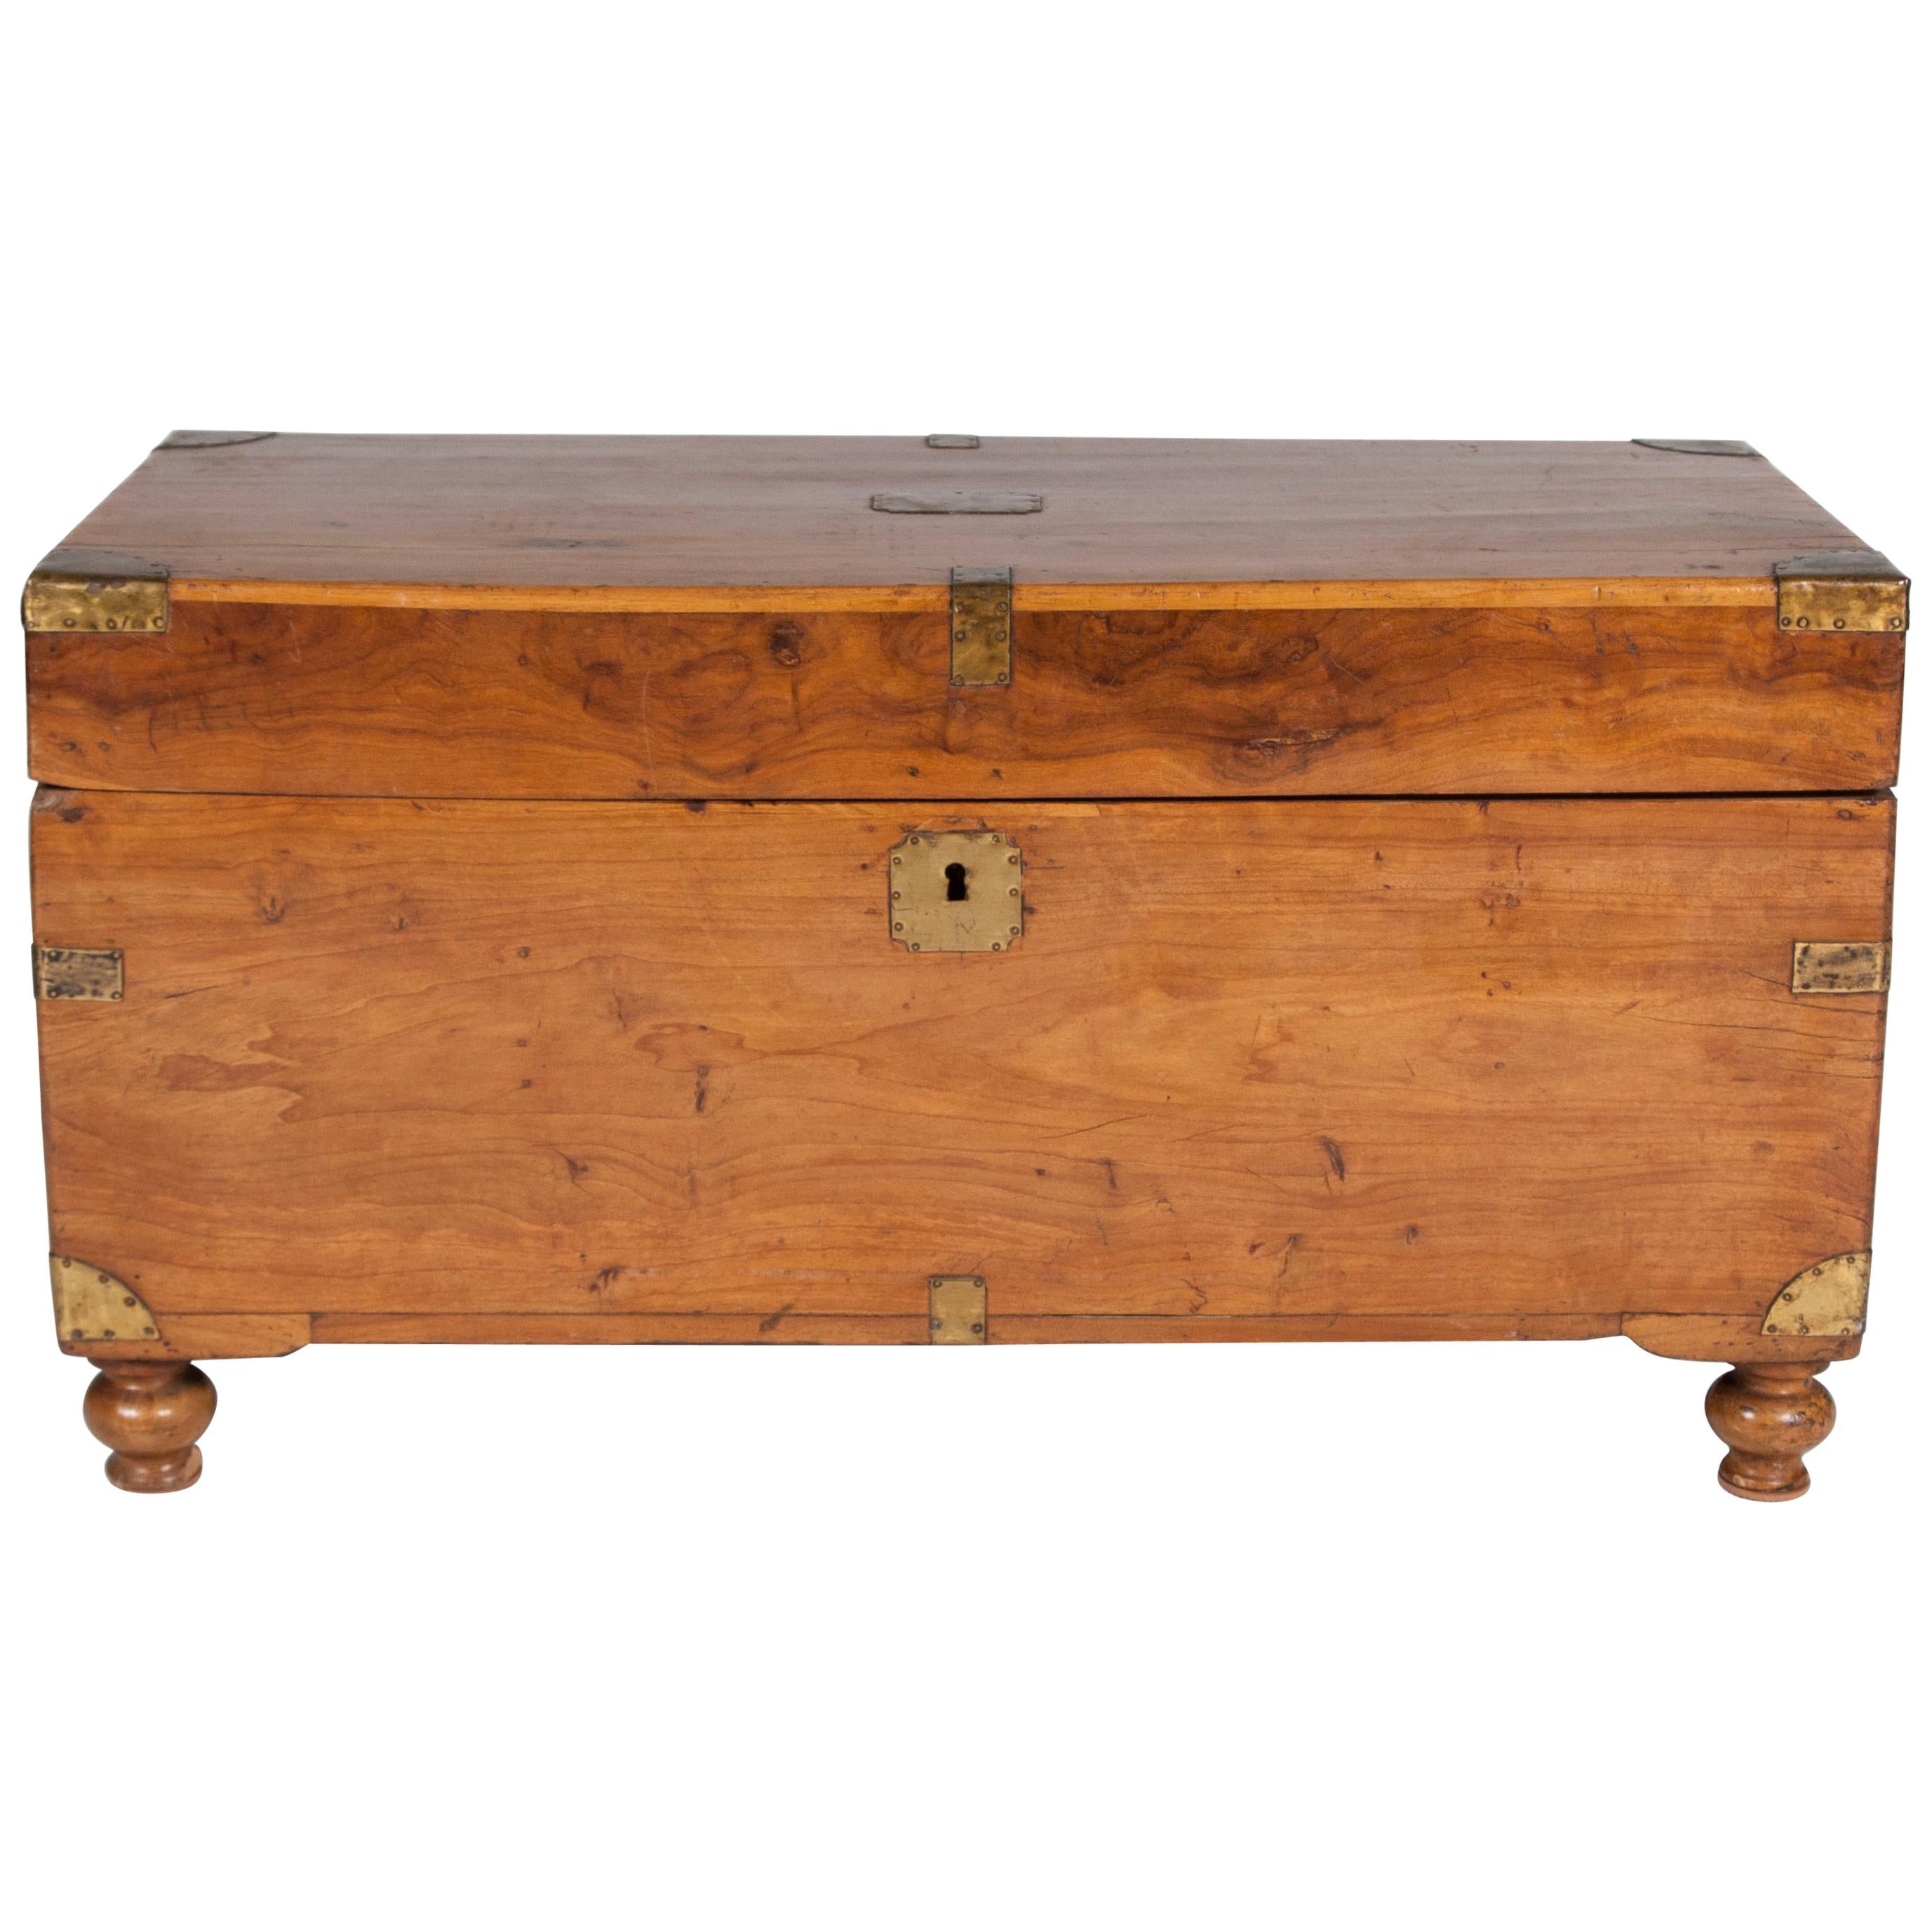 Camphor Wood Trunk with Hinged Lid, Brass Handles and Mounts, on Turned Feet